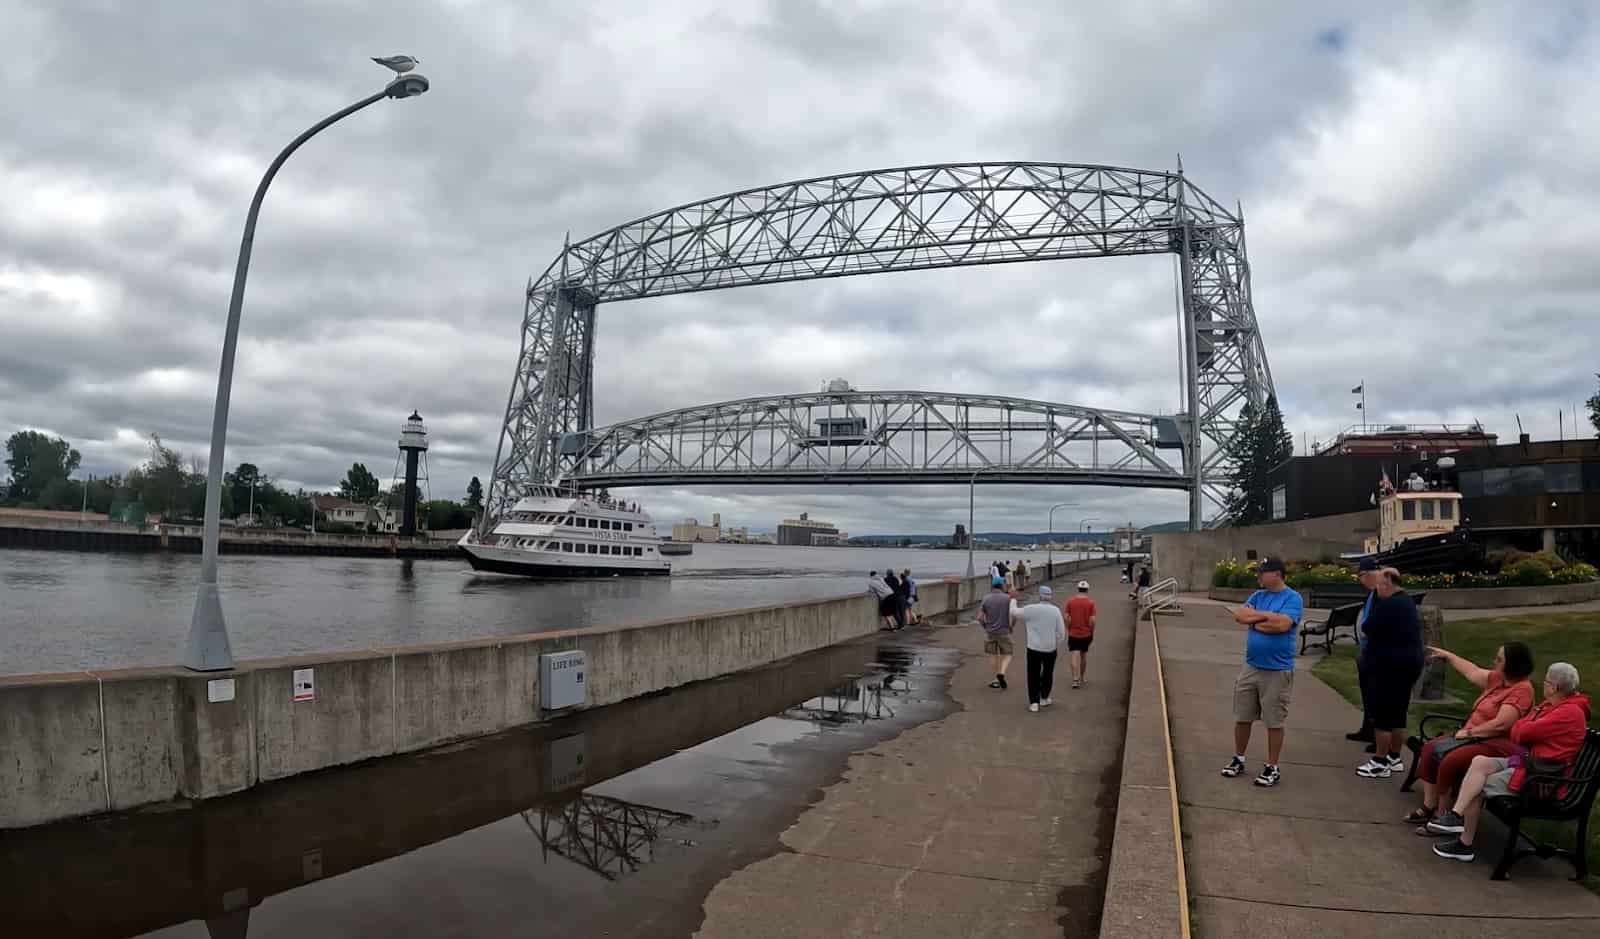 People gather by Duluth's lift bridge as a boat sails underneath on a cloudy day